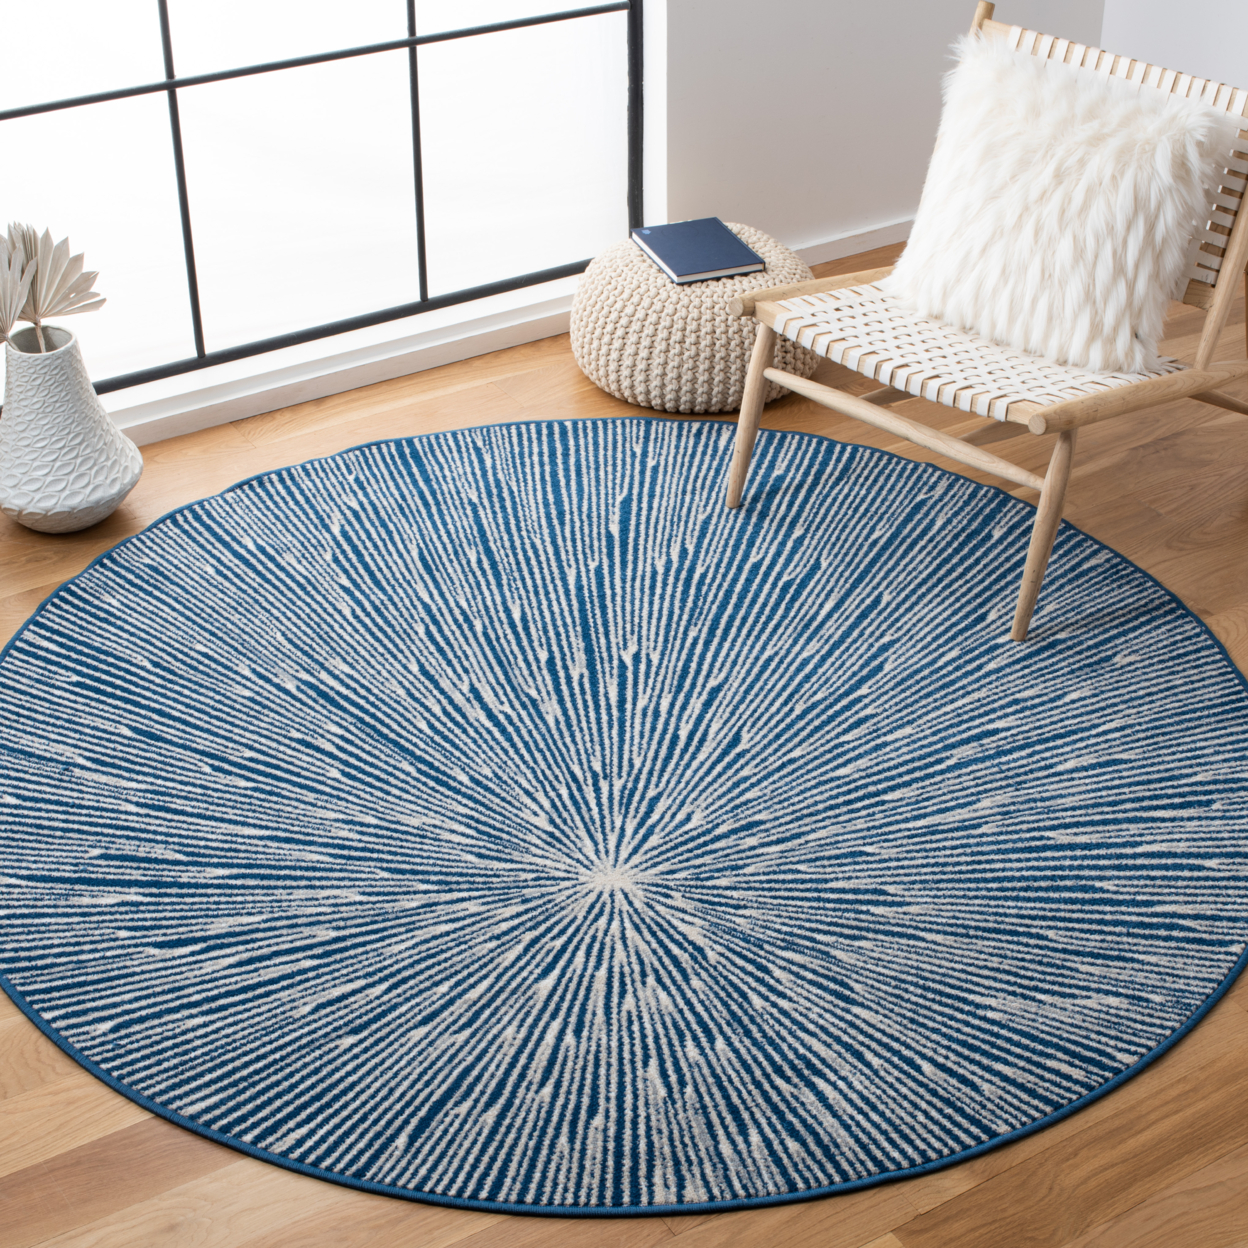 SAFAVIEH Belmont Collection BMT136N Navy / Grey Rug - 6-7 X 6-7 Square